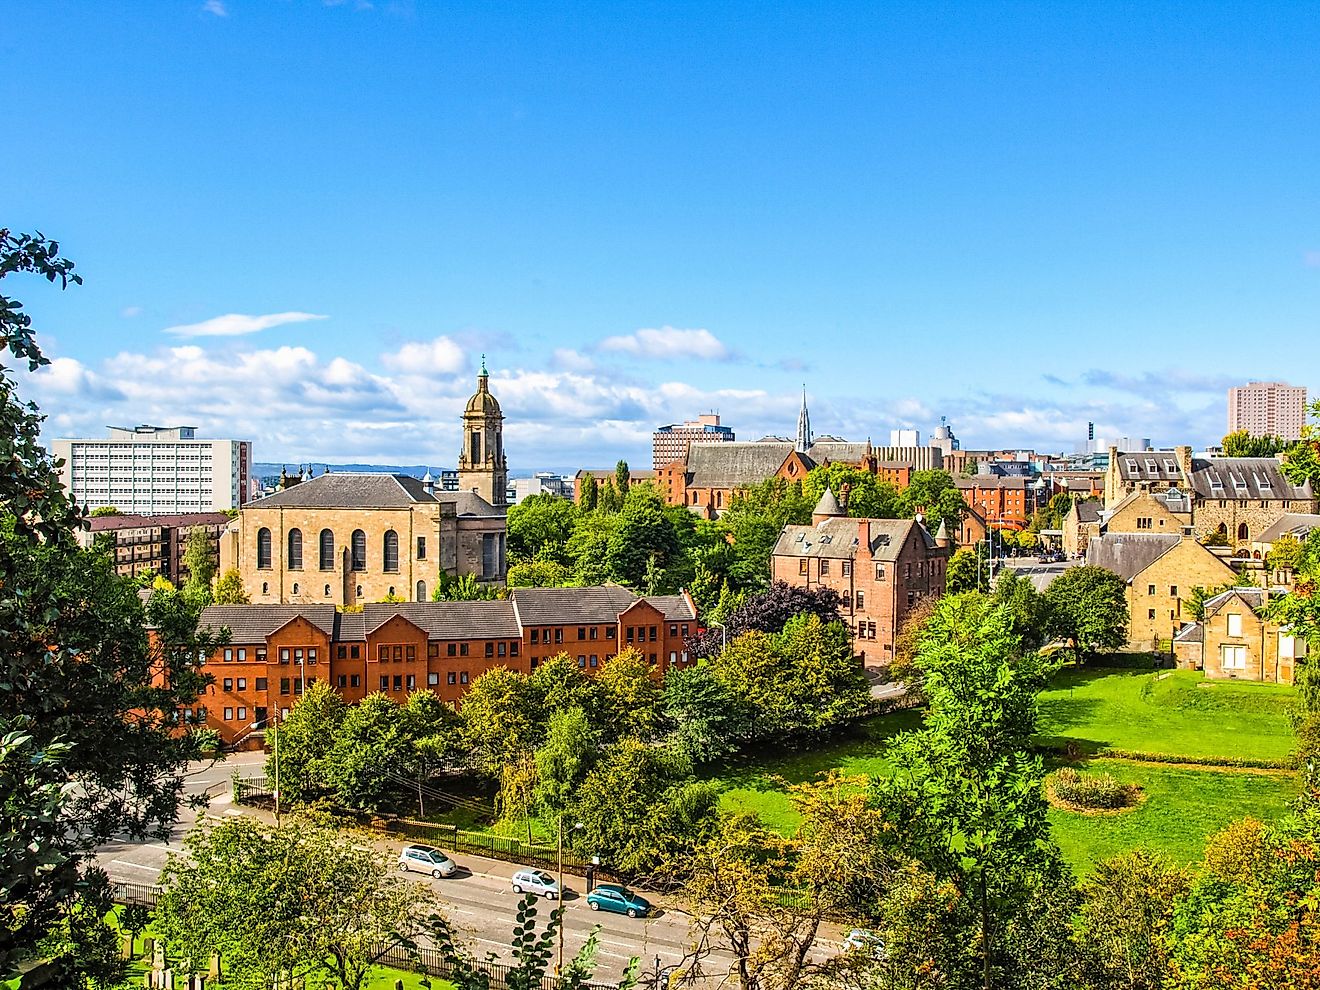 View of the city of Glasgow in Scotland, United Kingdom